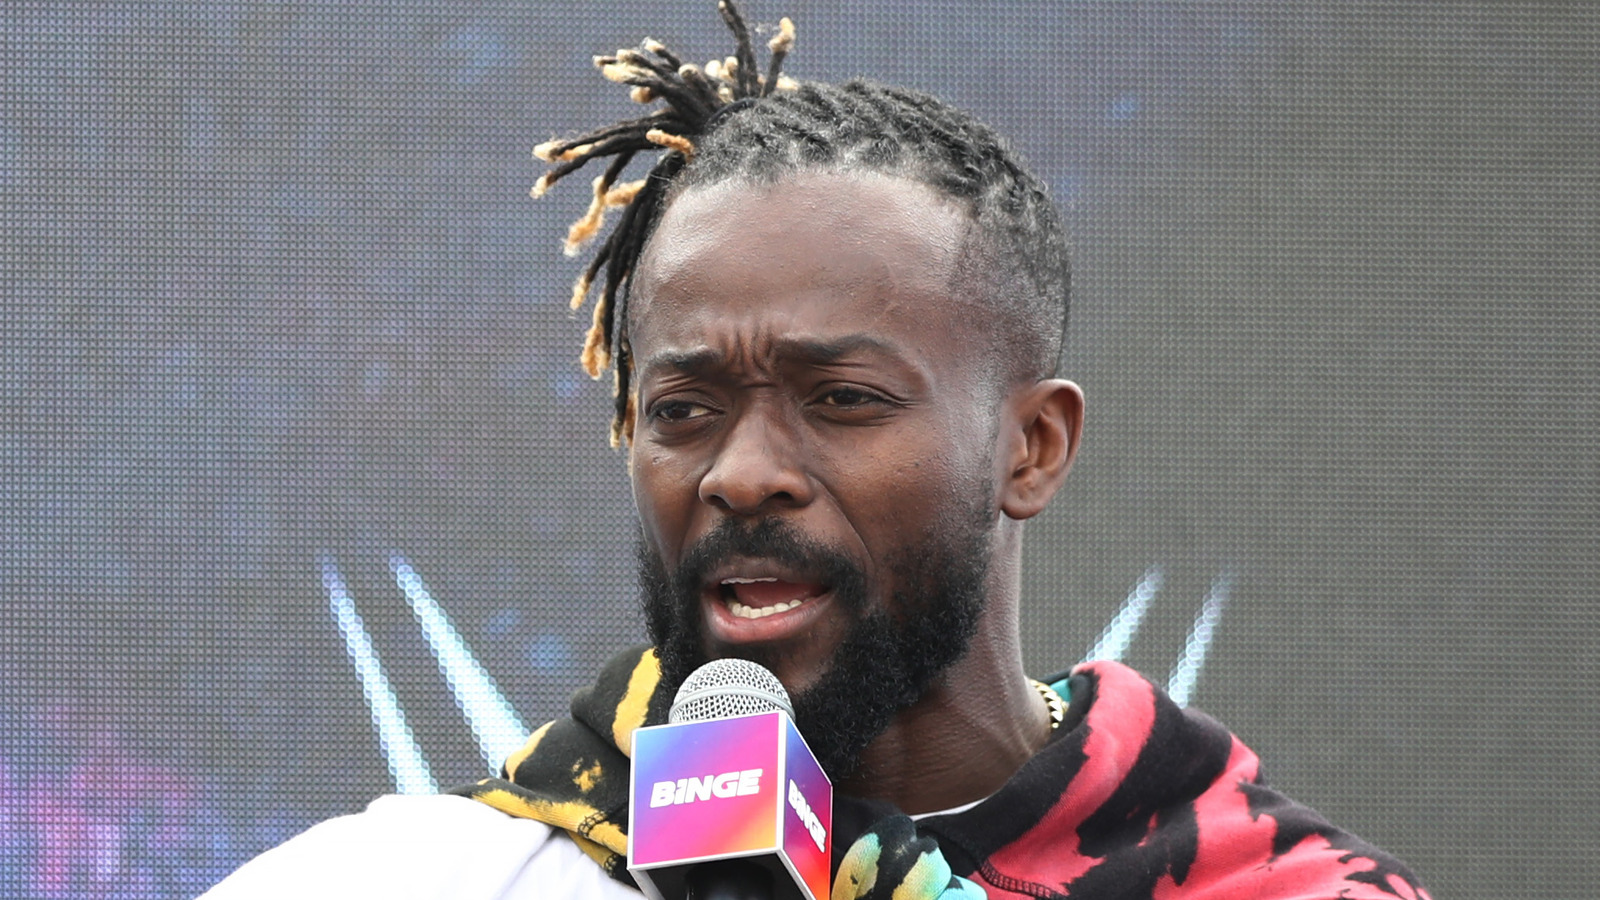 WWE Star Kofi Kingston Discusses The 'Most Important' Element Of Wrestling